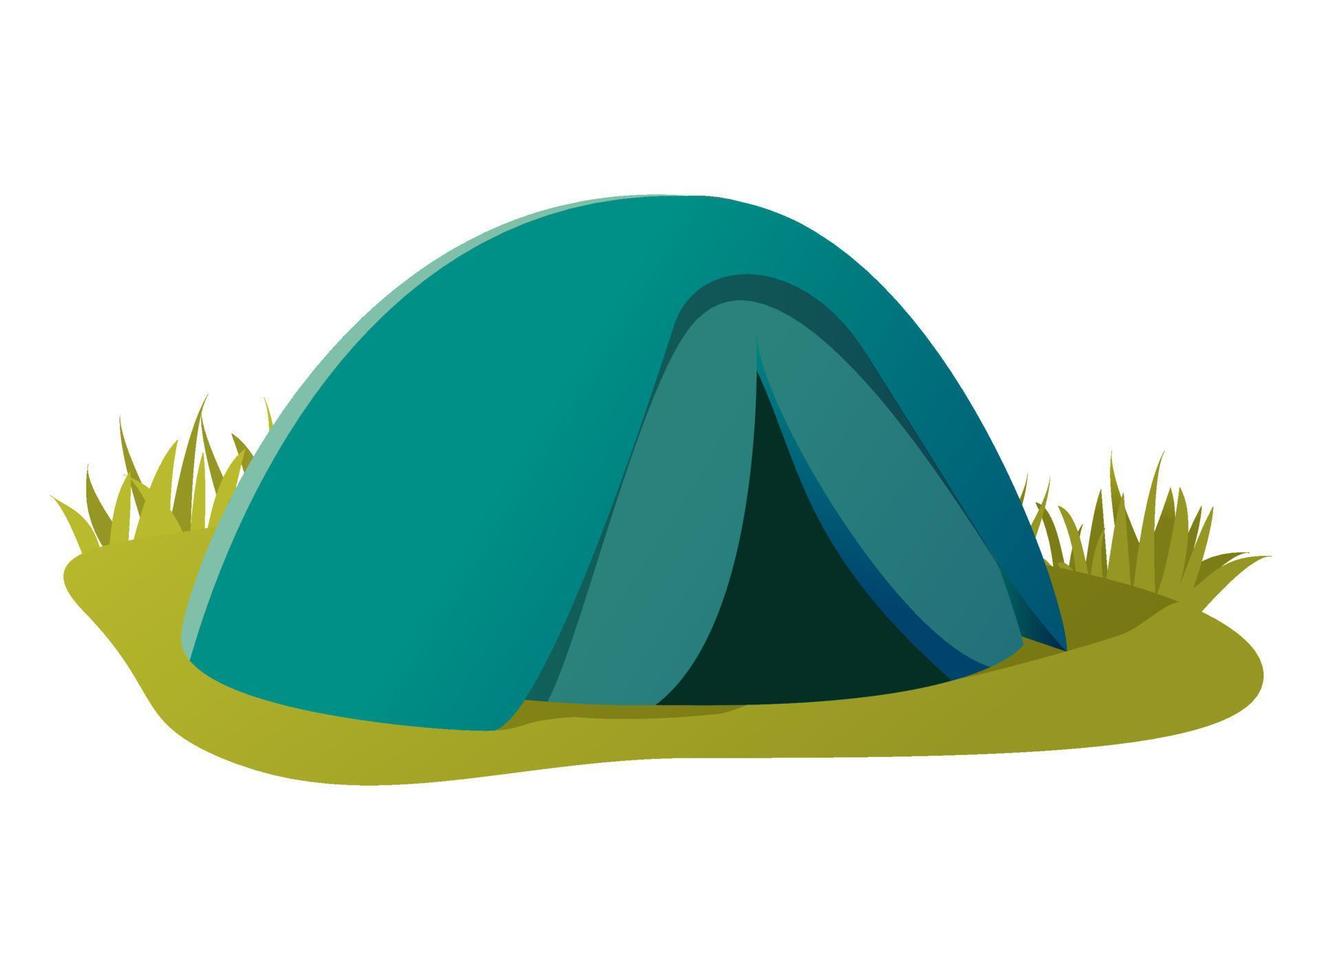 Hiking camping tent.Vector flat illustration.Isolated on white background.Green grass. vector